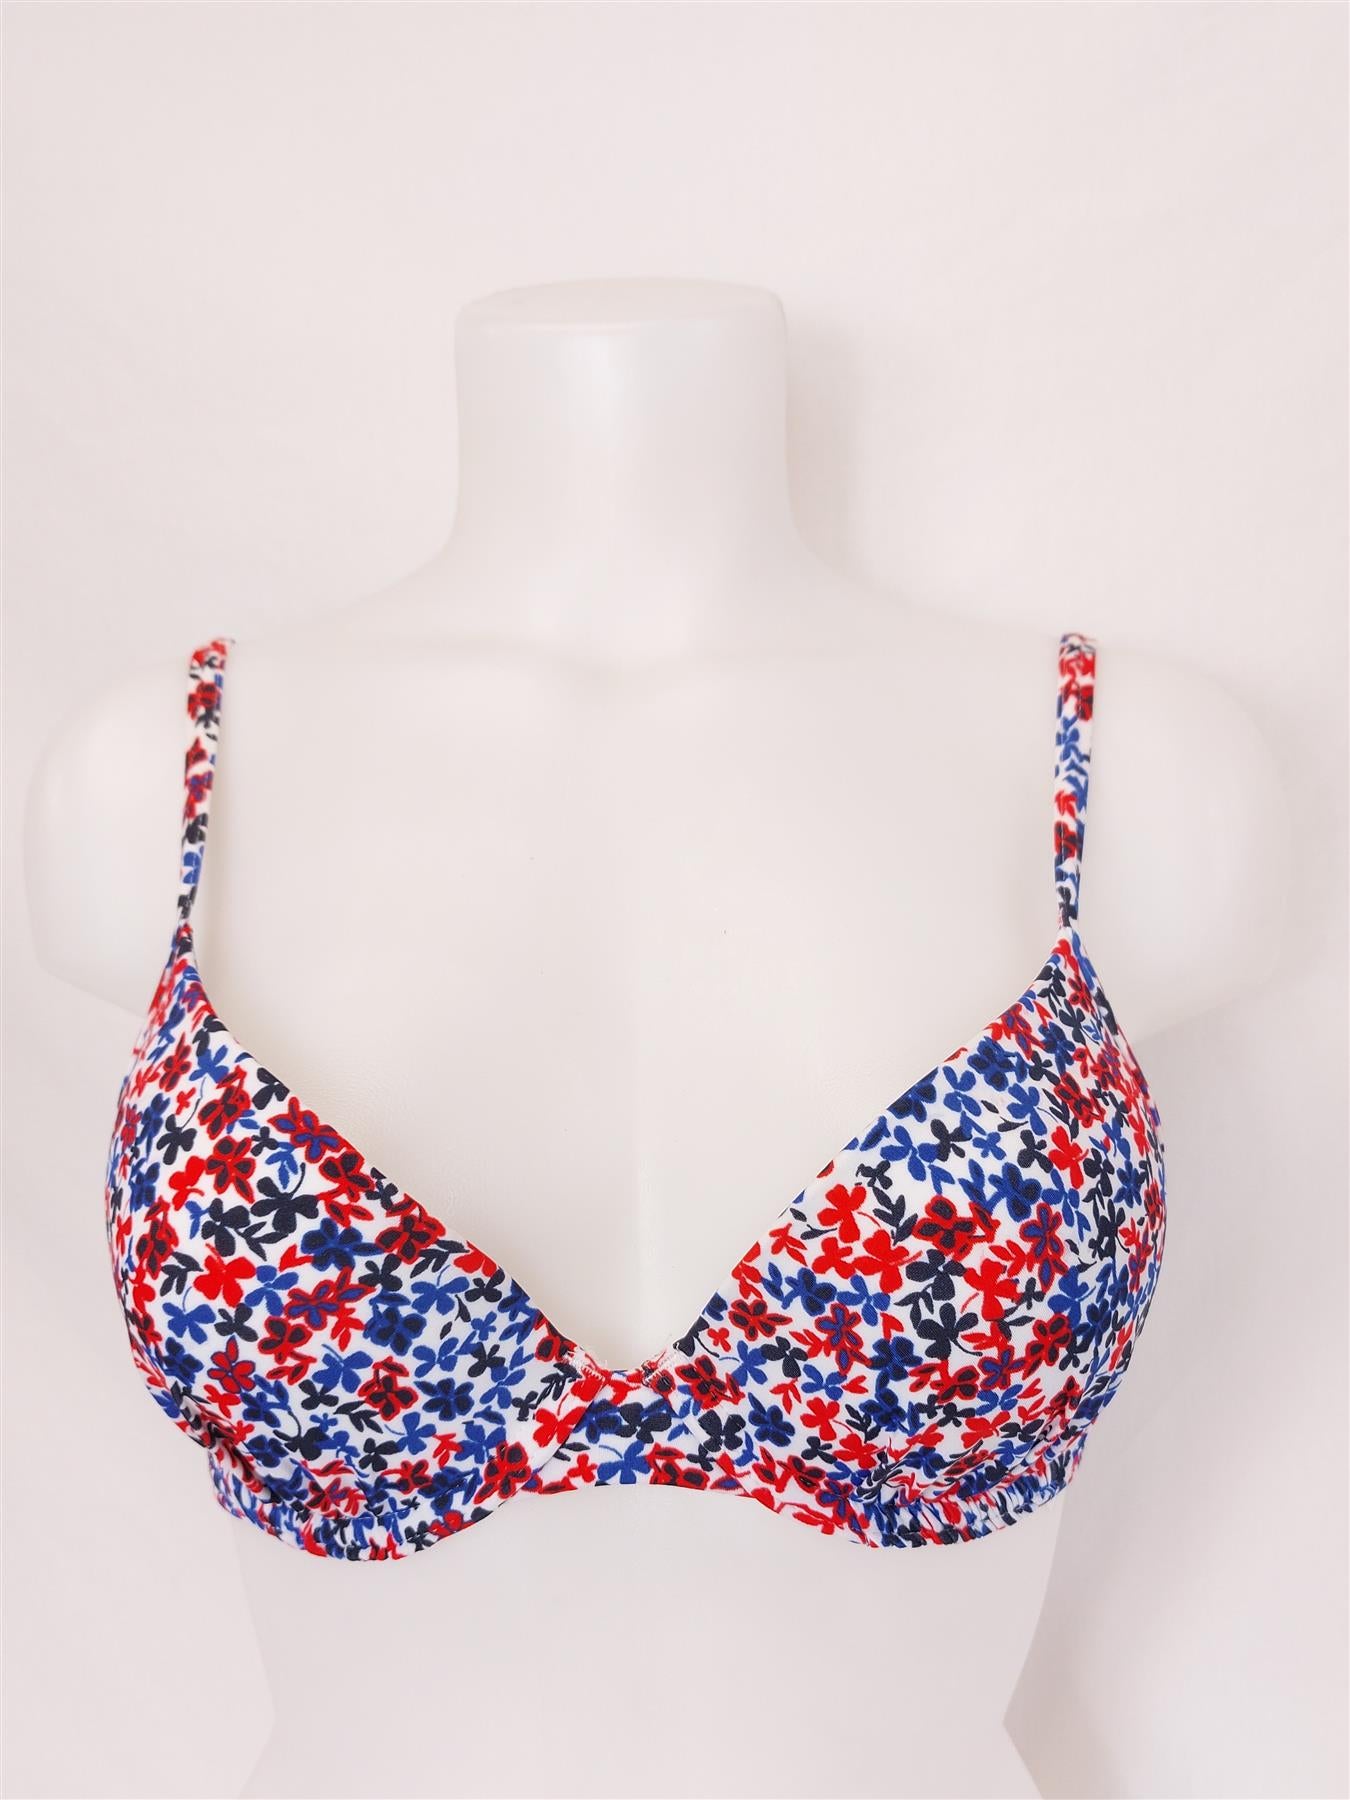 Ditsy Floral Print Plunge Bikini Top (Top Only) Brand New